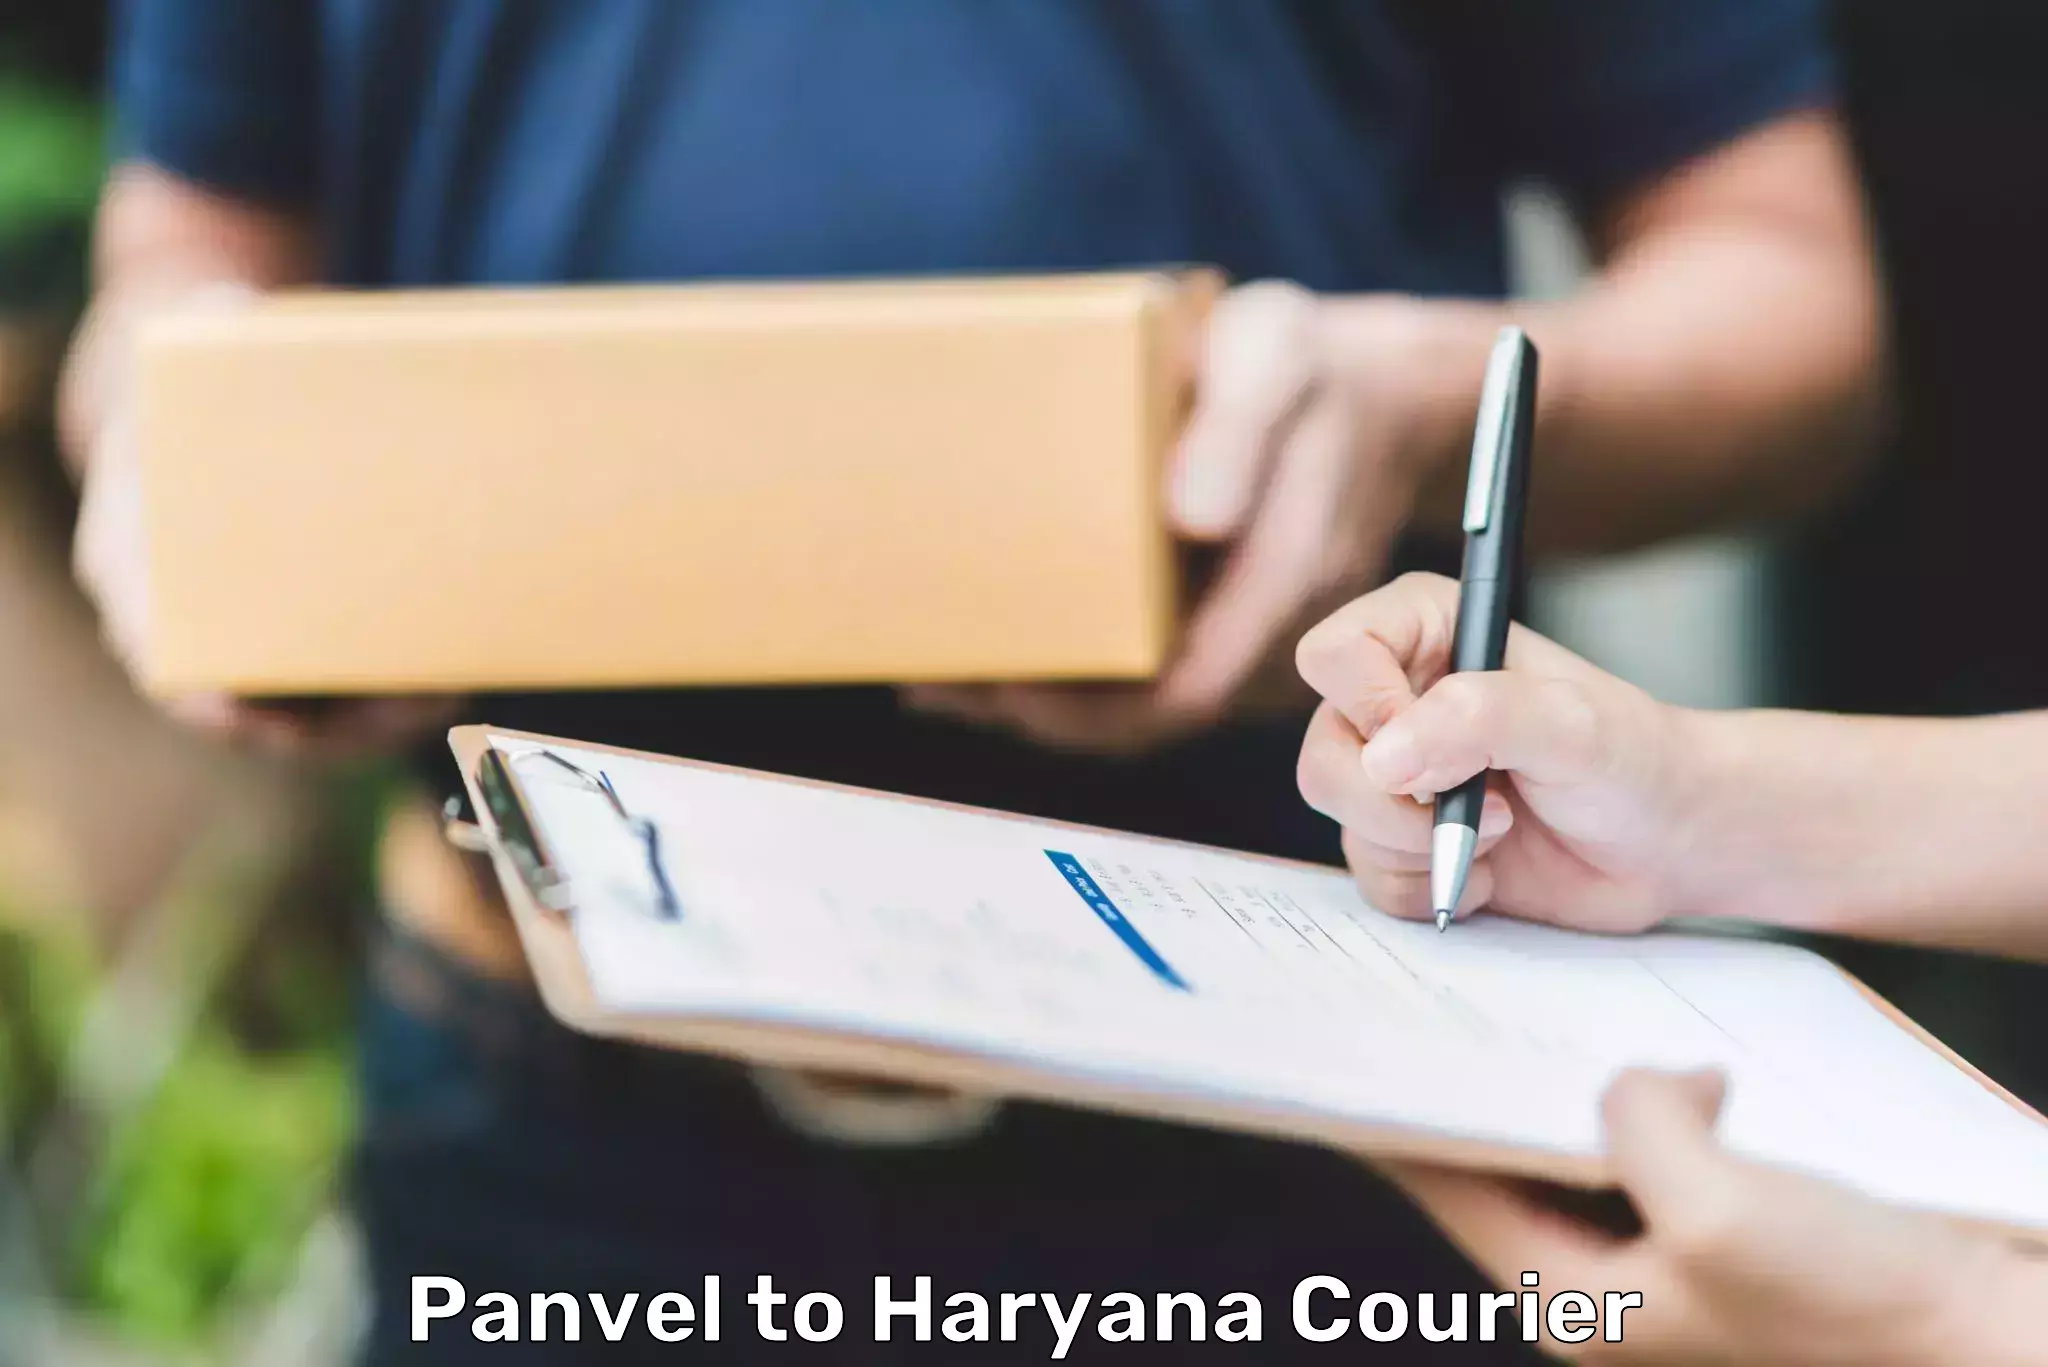 Affordable parcel service Panvel to Haryana